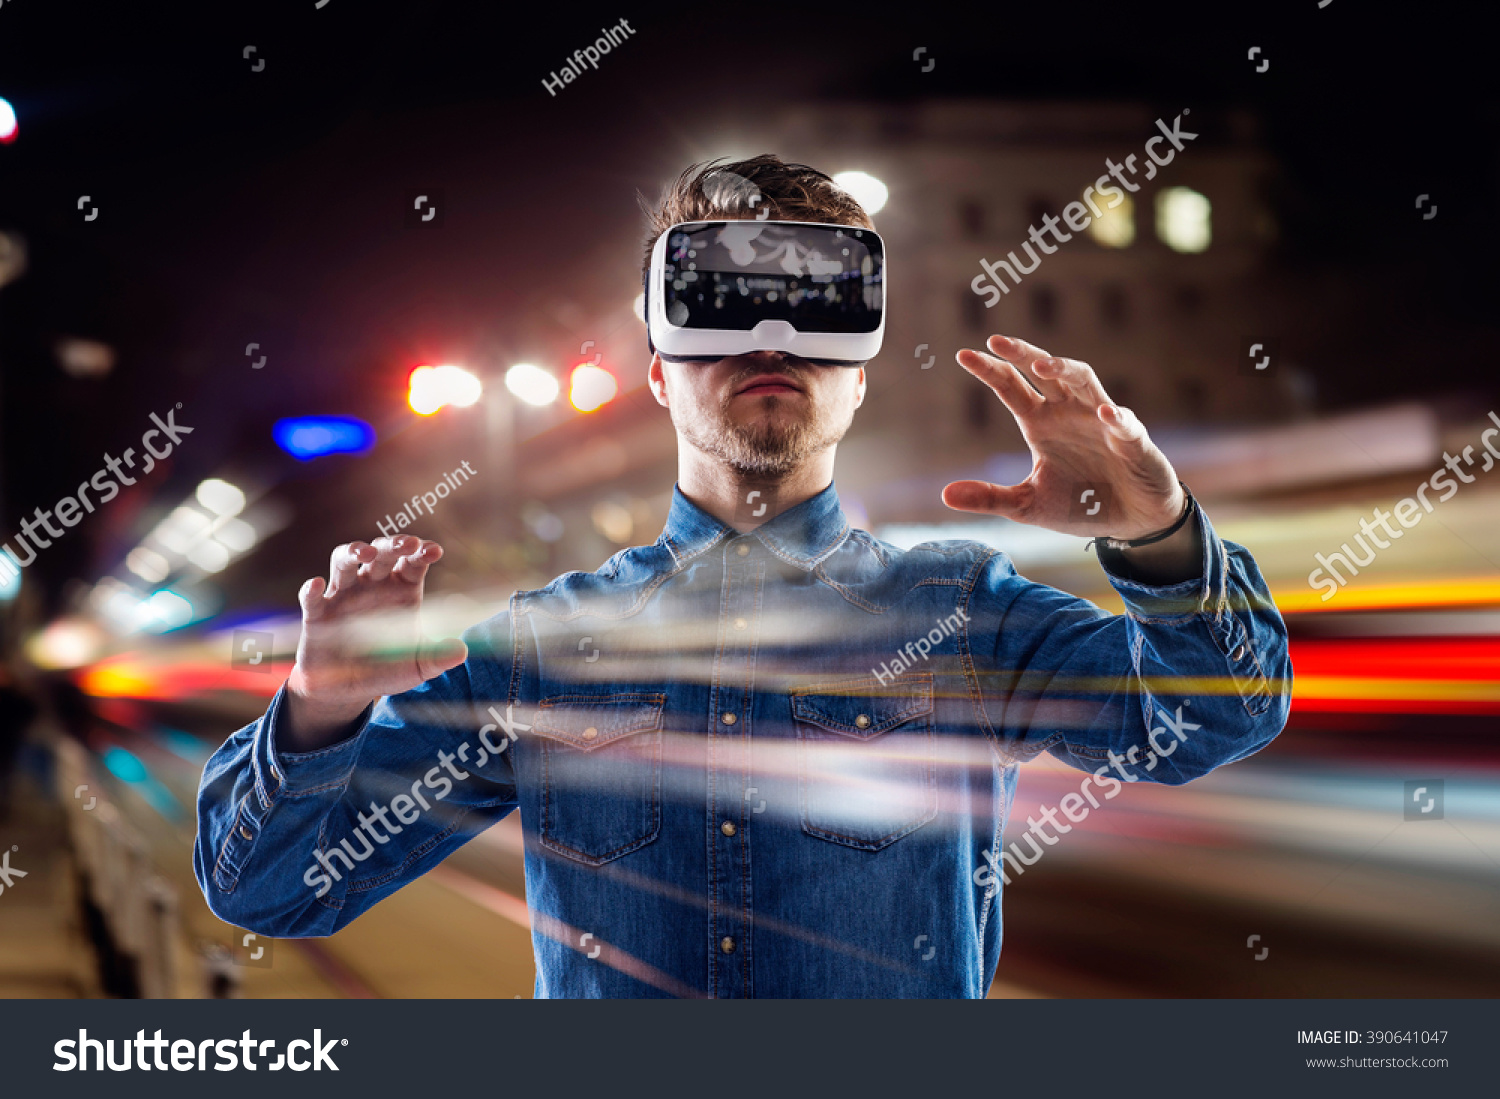 Double exposure, man wearing virtual reality goggles, night city #390641047